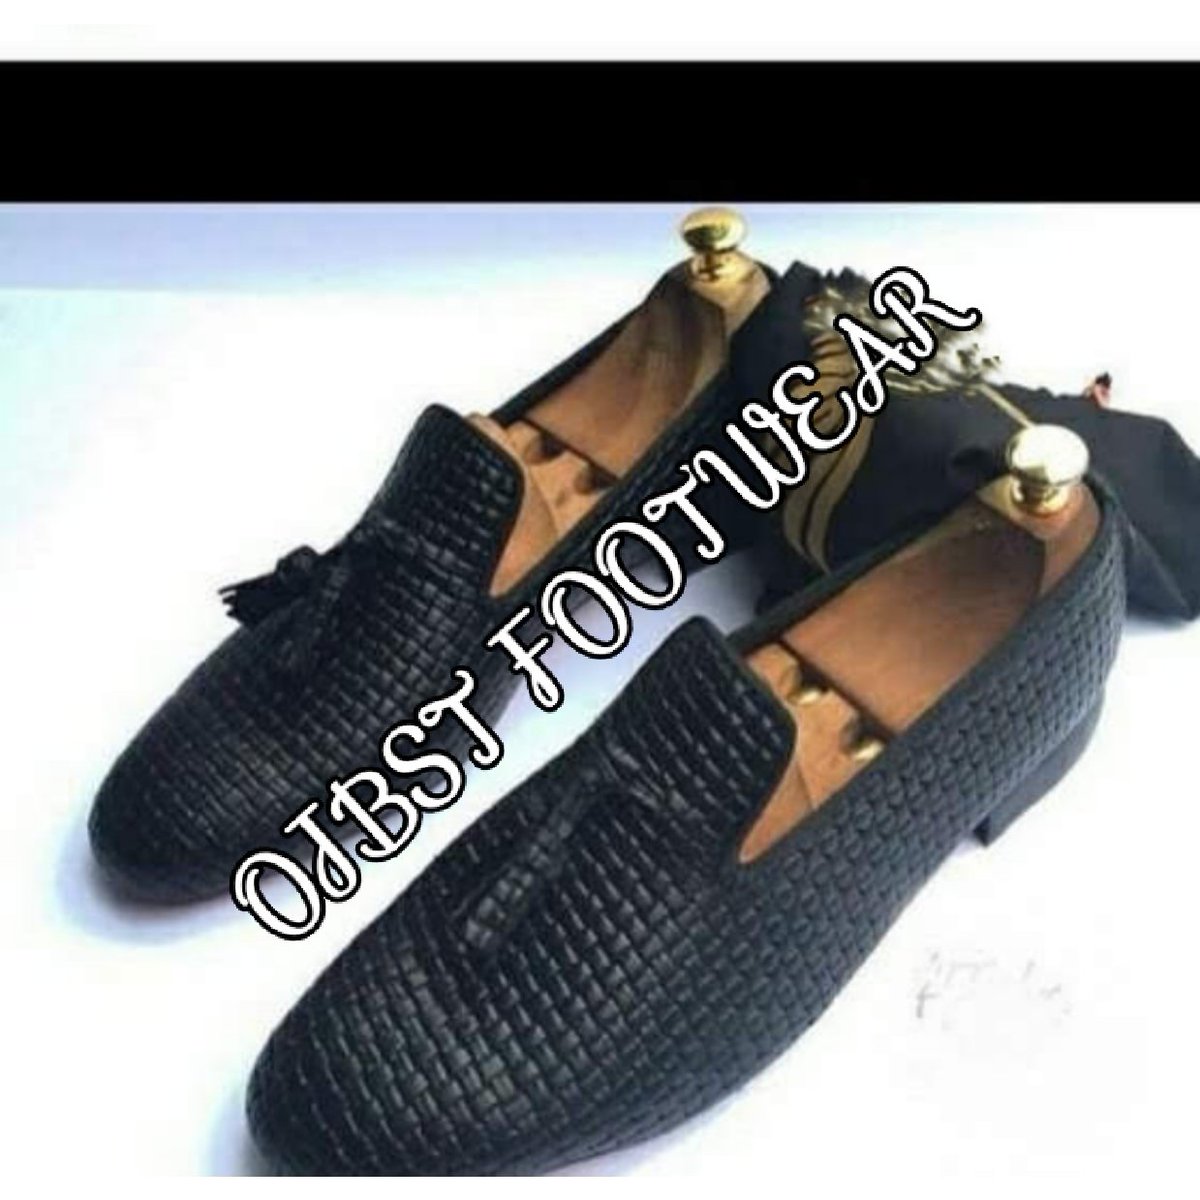 TASSEL LOAFERSWell, the origin of tassel loafer remain unknown, but it was said a man called Paul Lukas brought it to business meeting instead of a lace shoe in America.. i think it must be an idea of professional handmade shoe makers of the pass..Twale to them